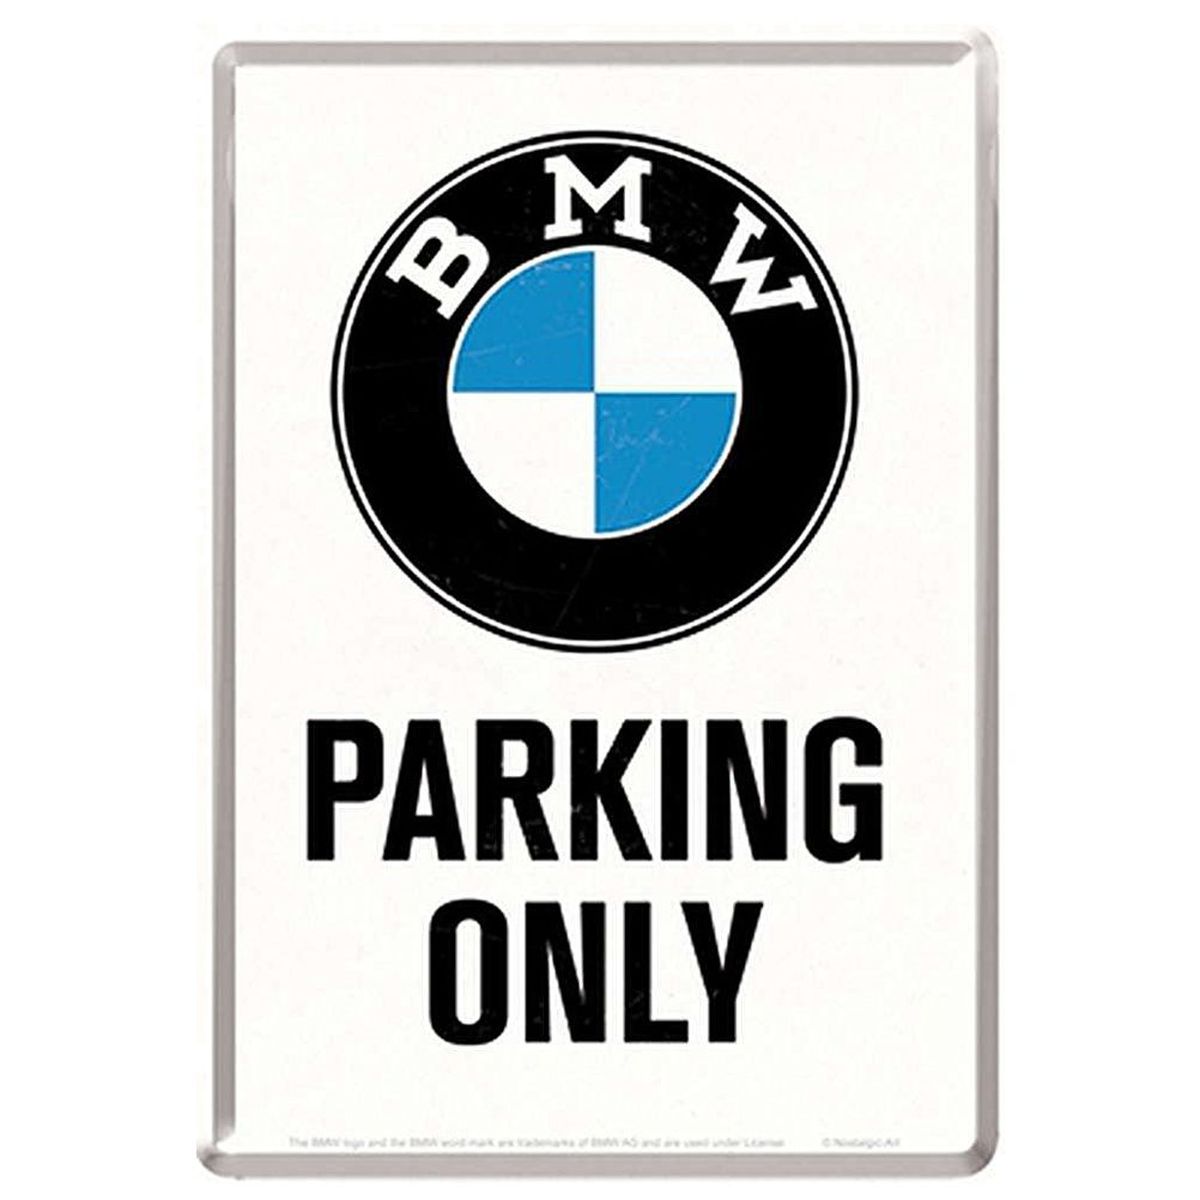 BMW Parking Only small metal plate